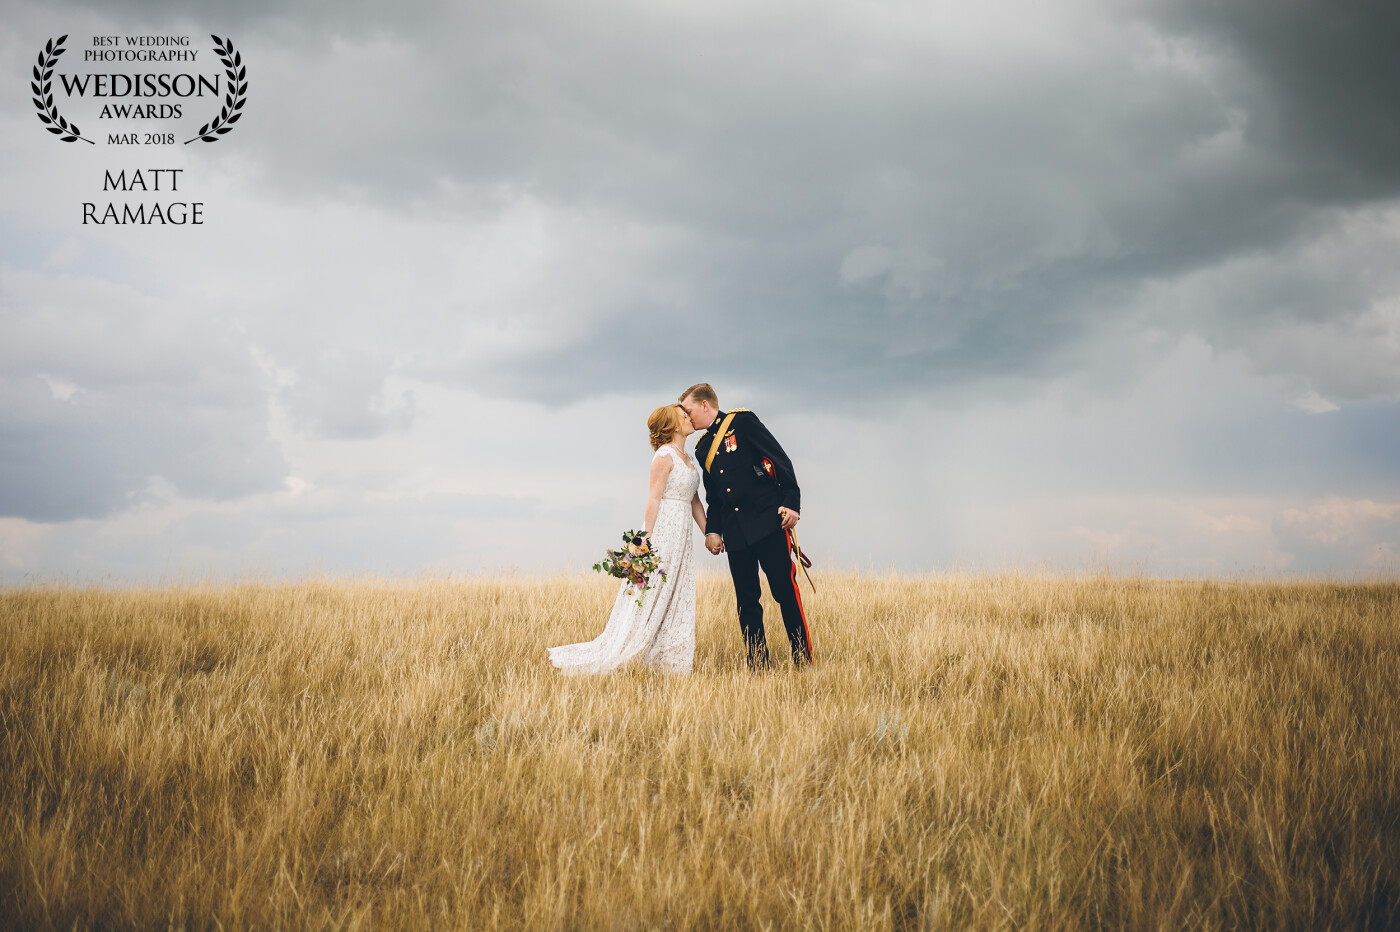 James and Julie tied the knot in the Canadian Prairies on the farm where Julie grew up. Their day was a beautiful celebration of love. It's beautiful to see James' dress uniform from the Canadian army alongside custom-made dress Julie wore. They perfectly incorporated their heritage into their wedding day. We love the striking clouds meeting the horizon of the plains centred on a simple kiss.